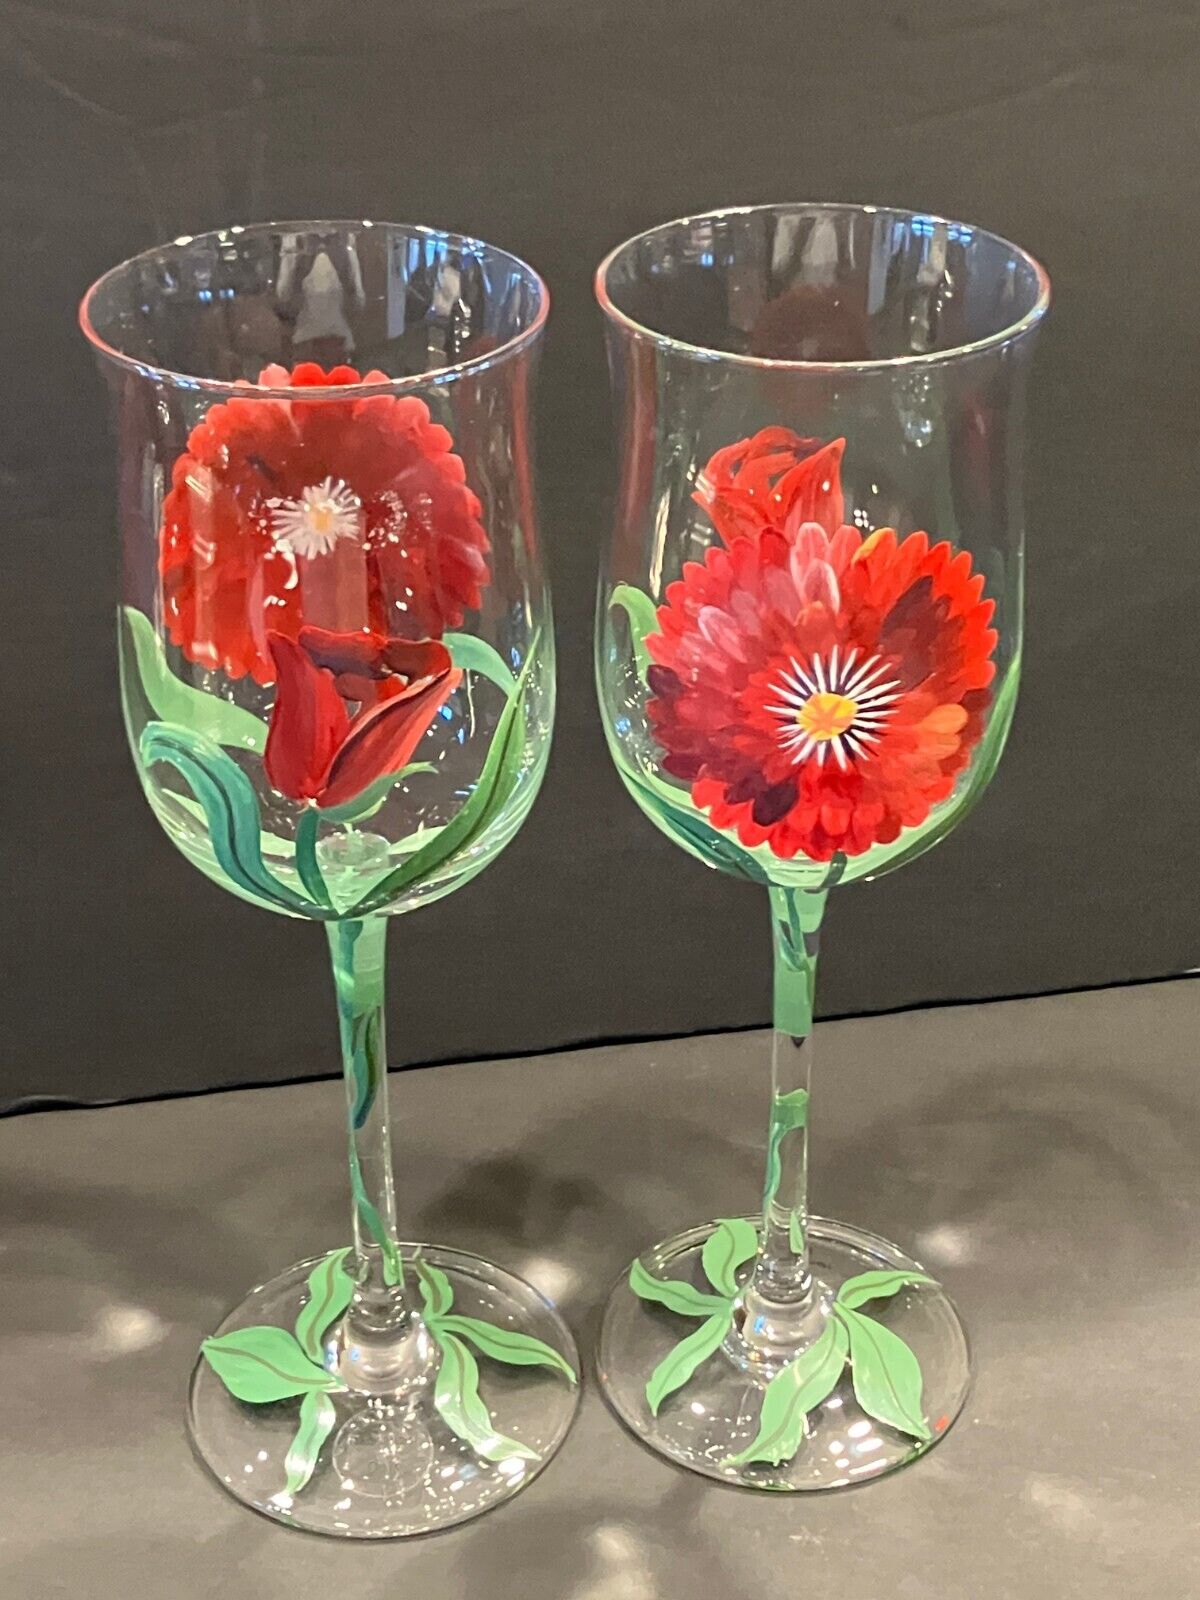 BLOCK VTG Hand painted Wine Glasses Red Flowers Delicate Glass New never used